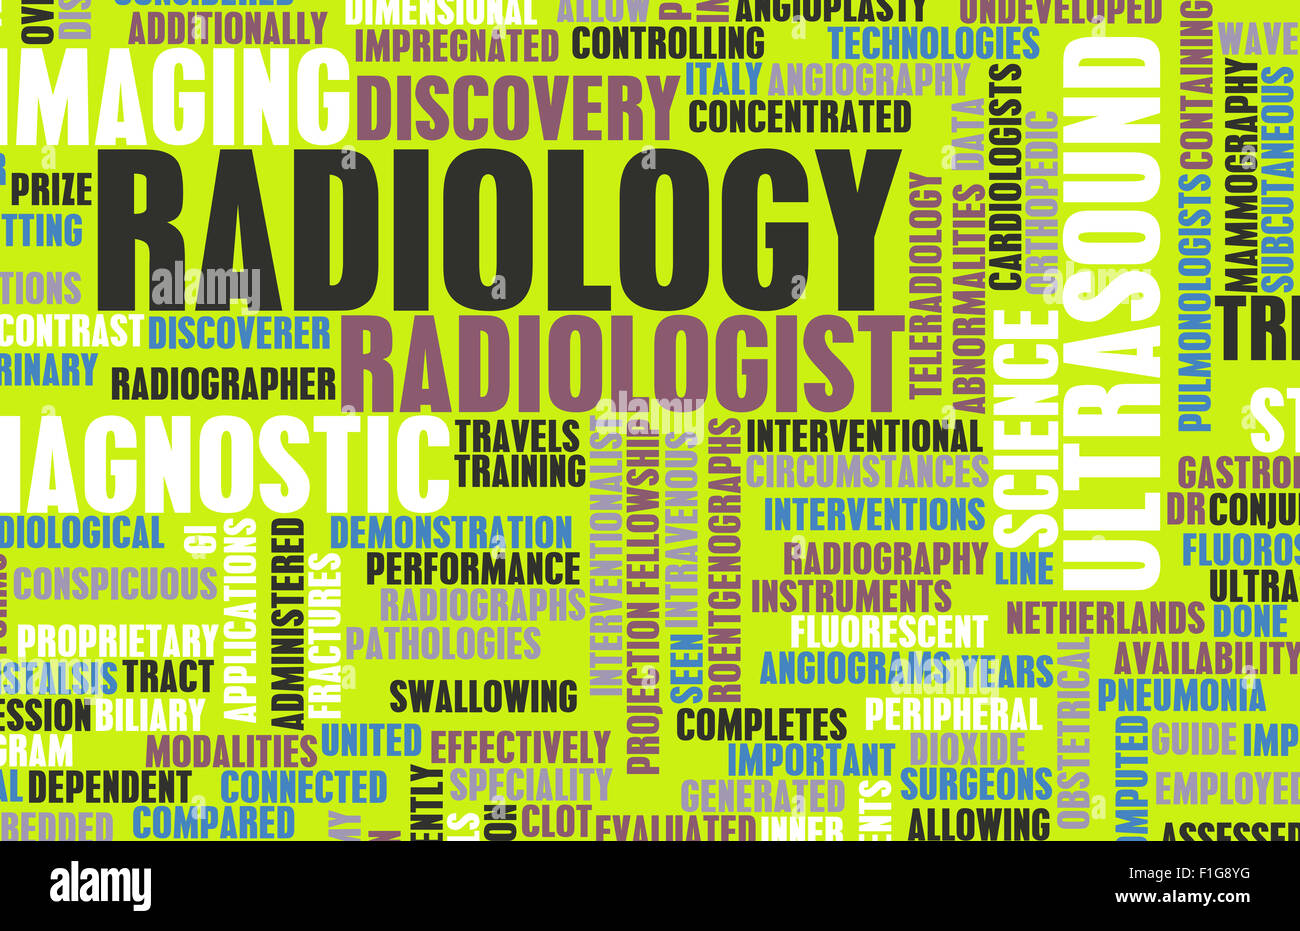 Radiology or Radiologist Medical Field Specialty As Art Stock Photo